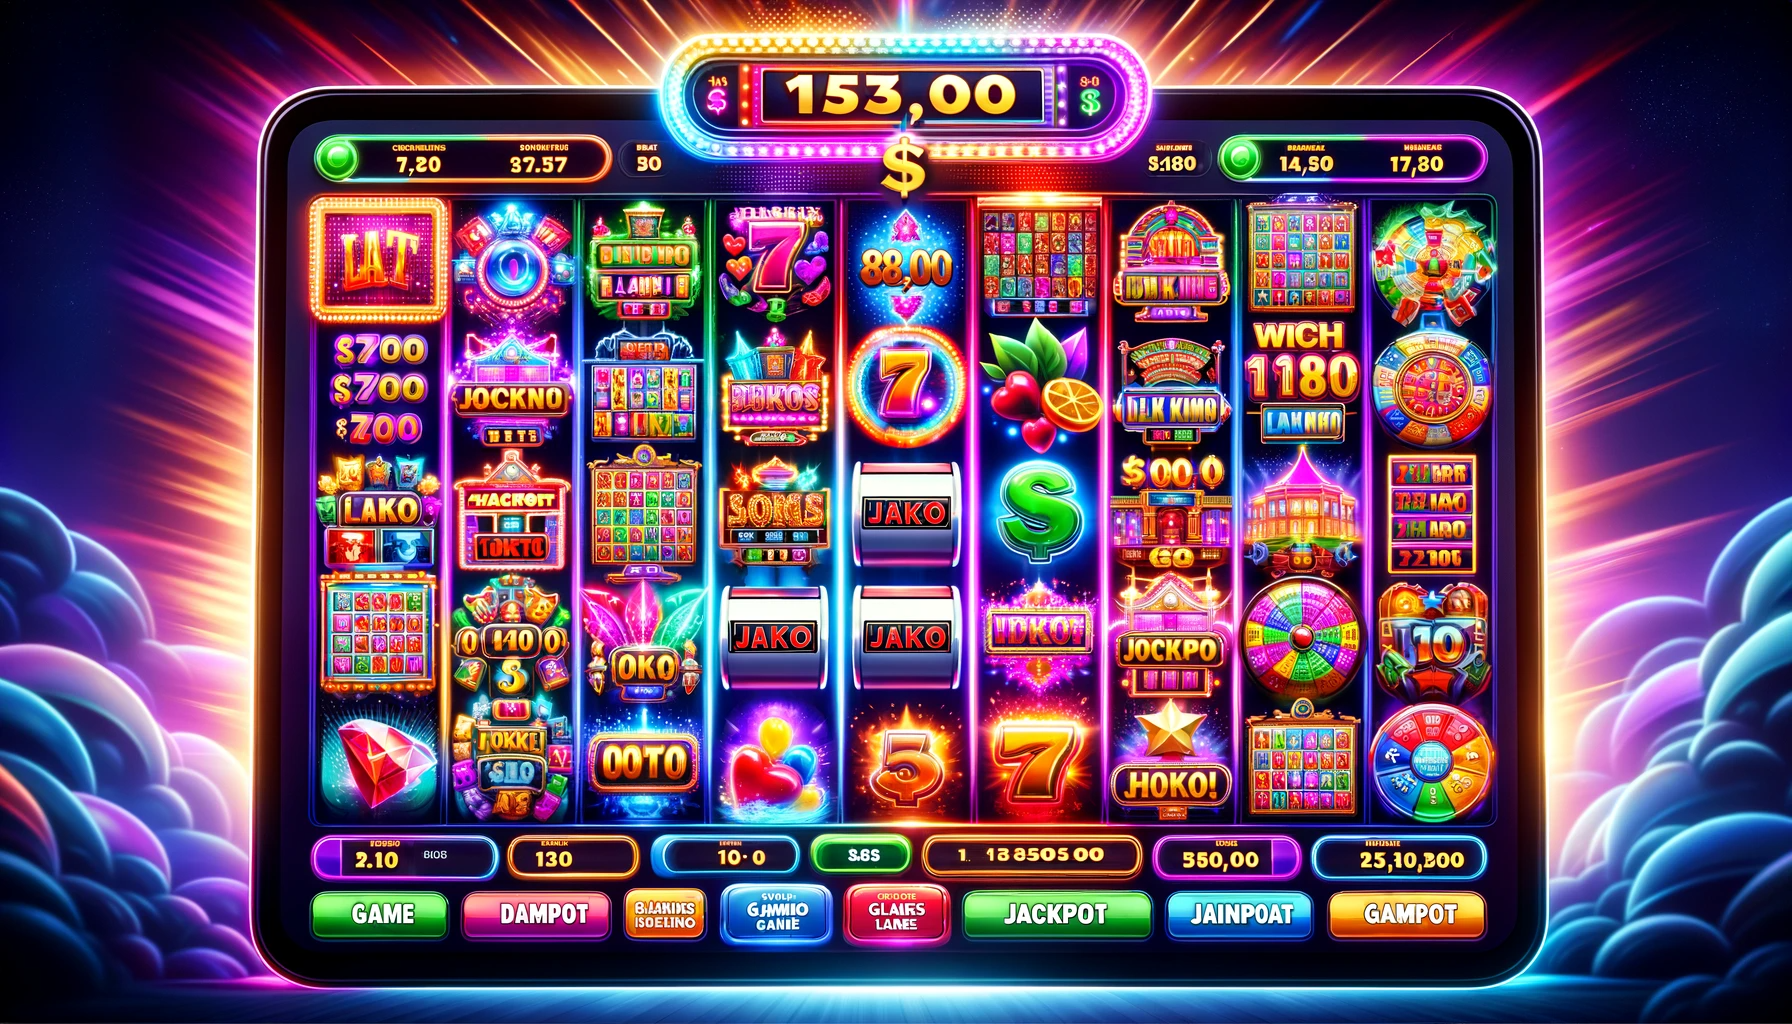 Photo of a vibrant online casino screen displaying an array of slot machine icons, with flashy graphics and bright colors. There are jackpot numbers ticking upwards, and various game options are available for selection.